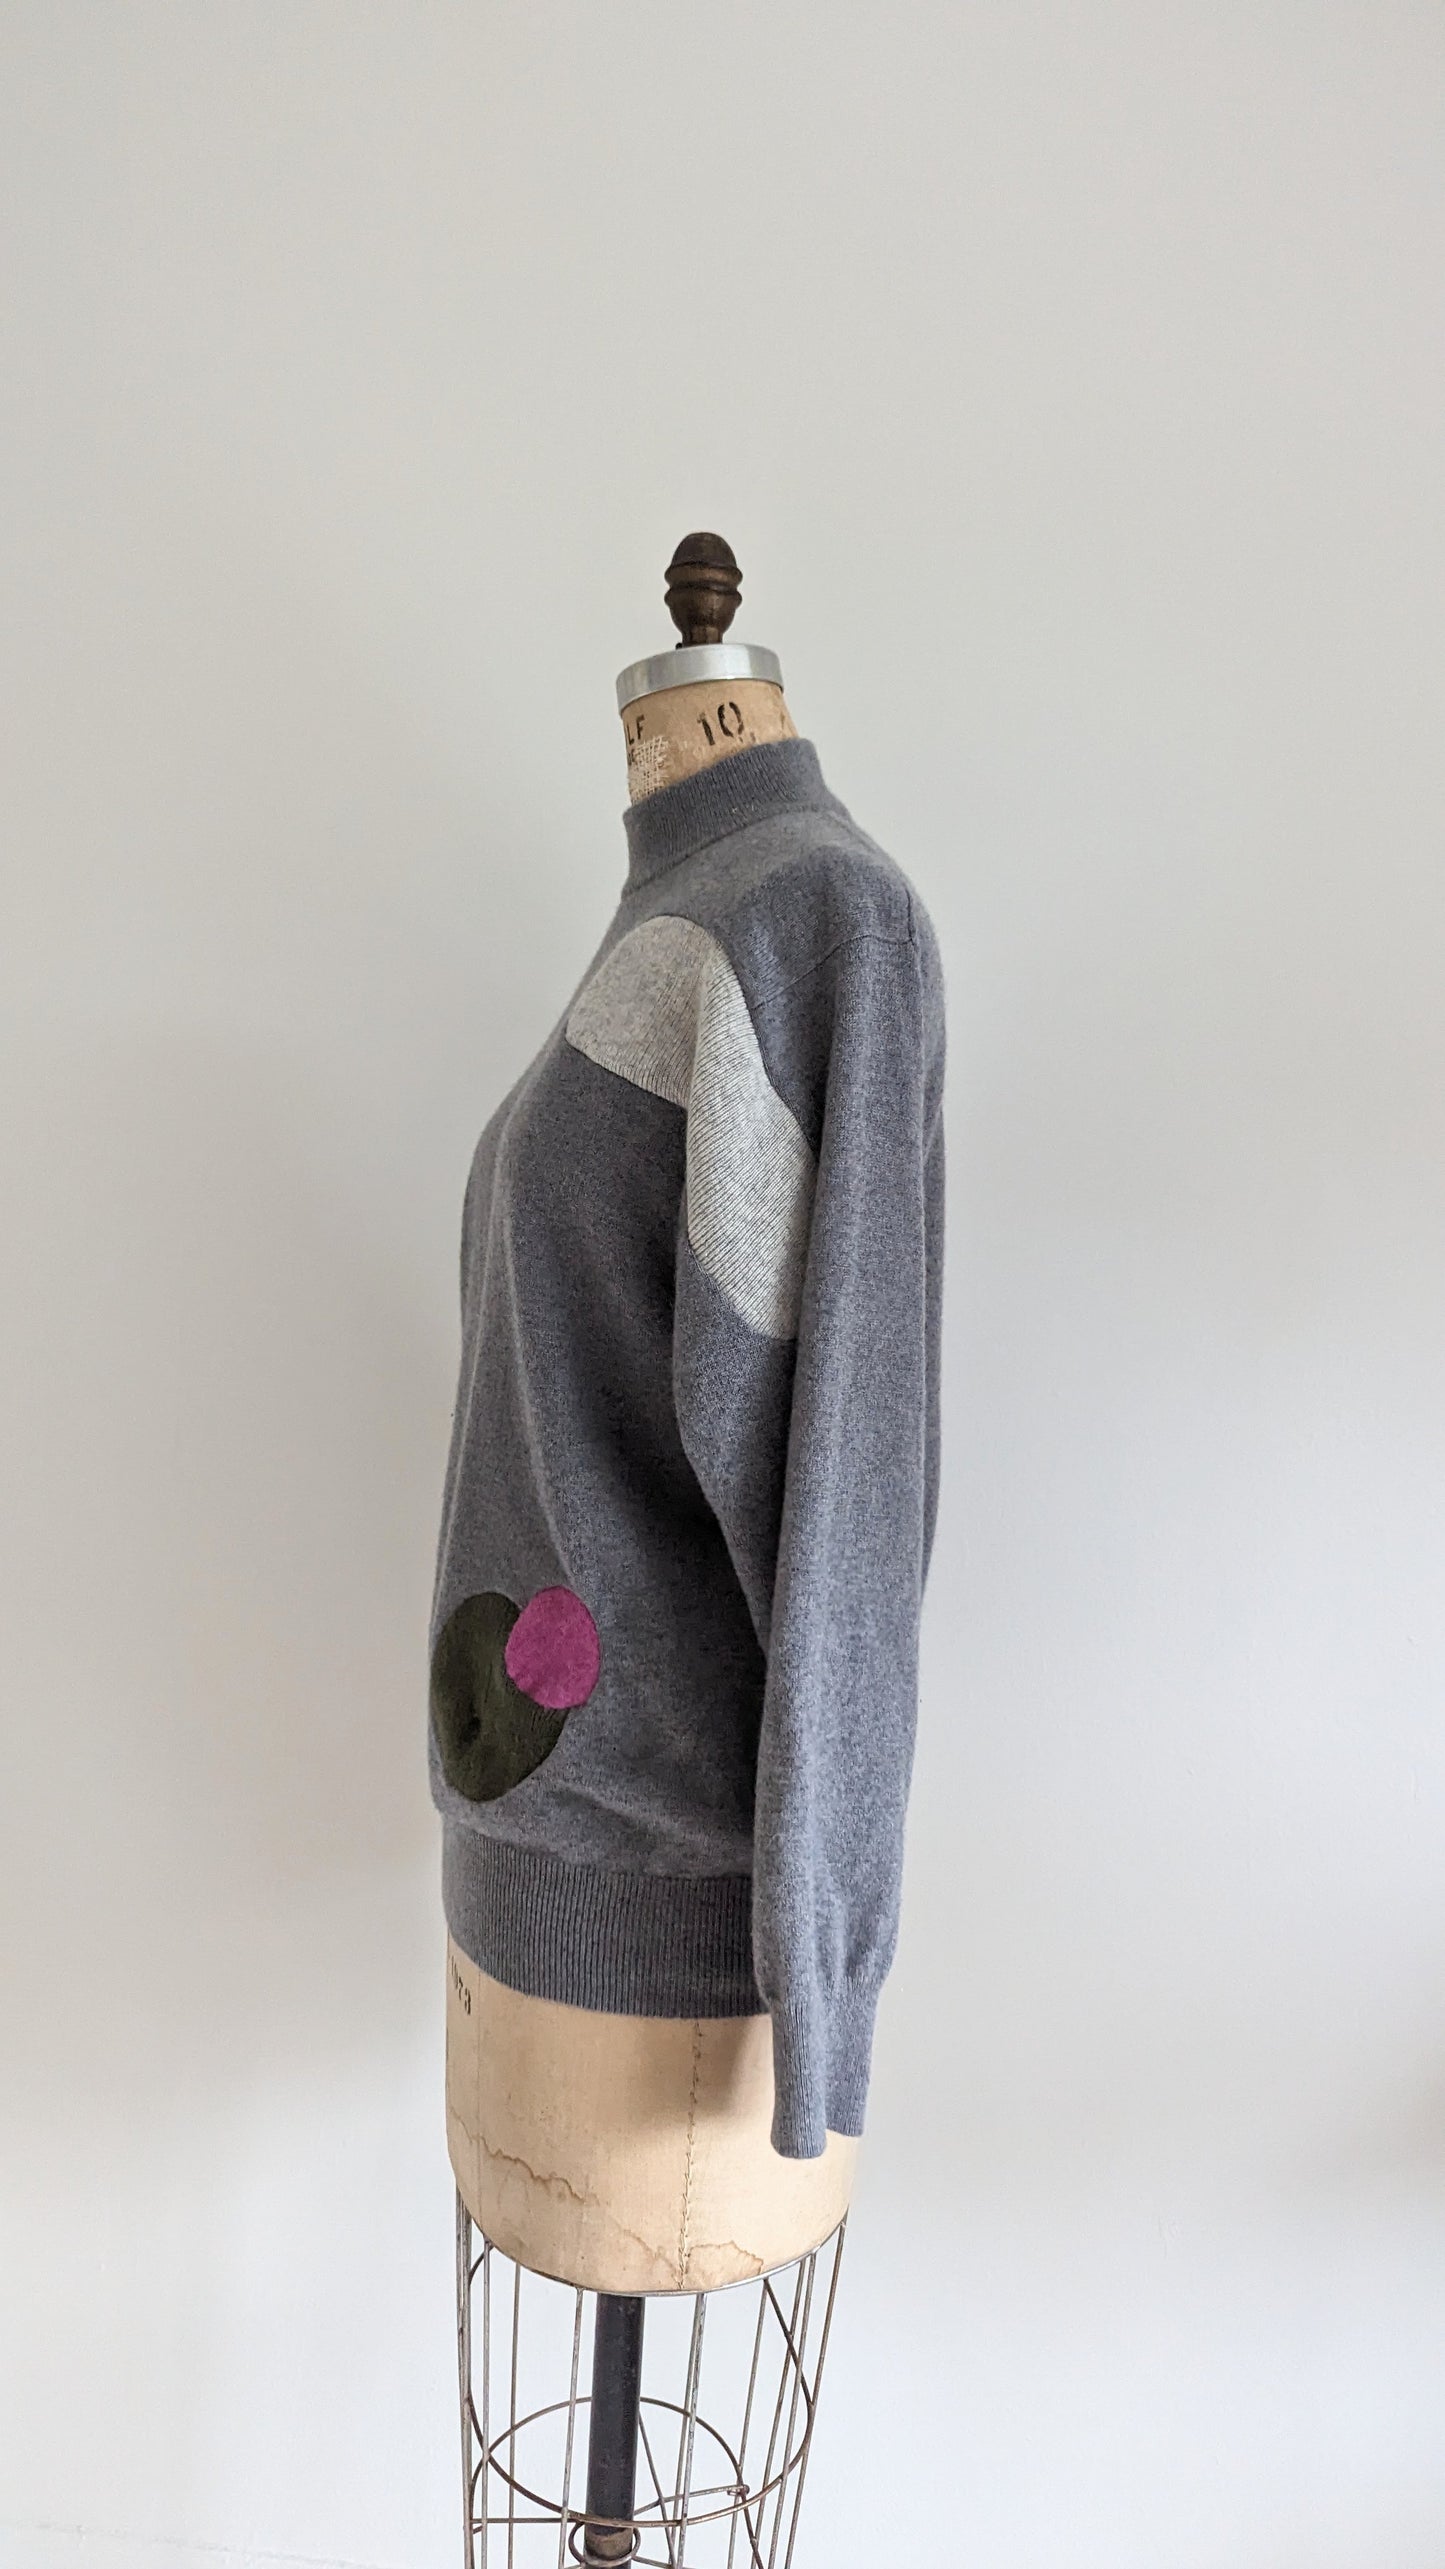 Abstract Art Patched Upcycled Cashmere Sweater M/L #ART16